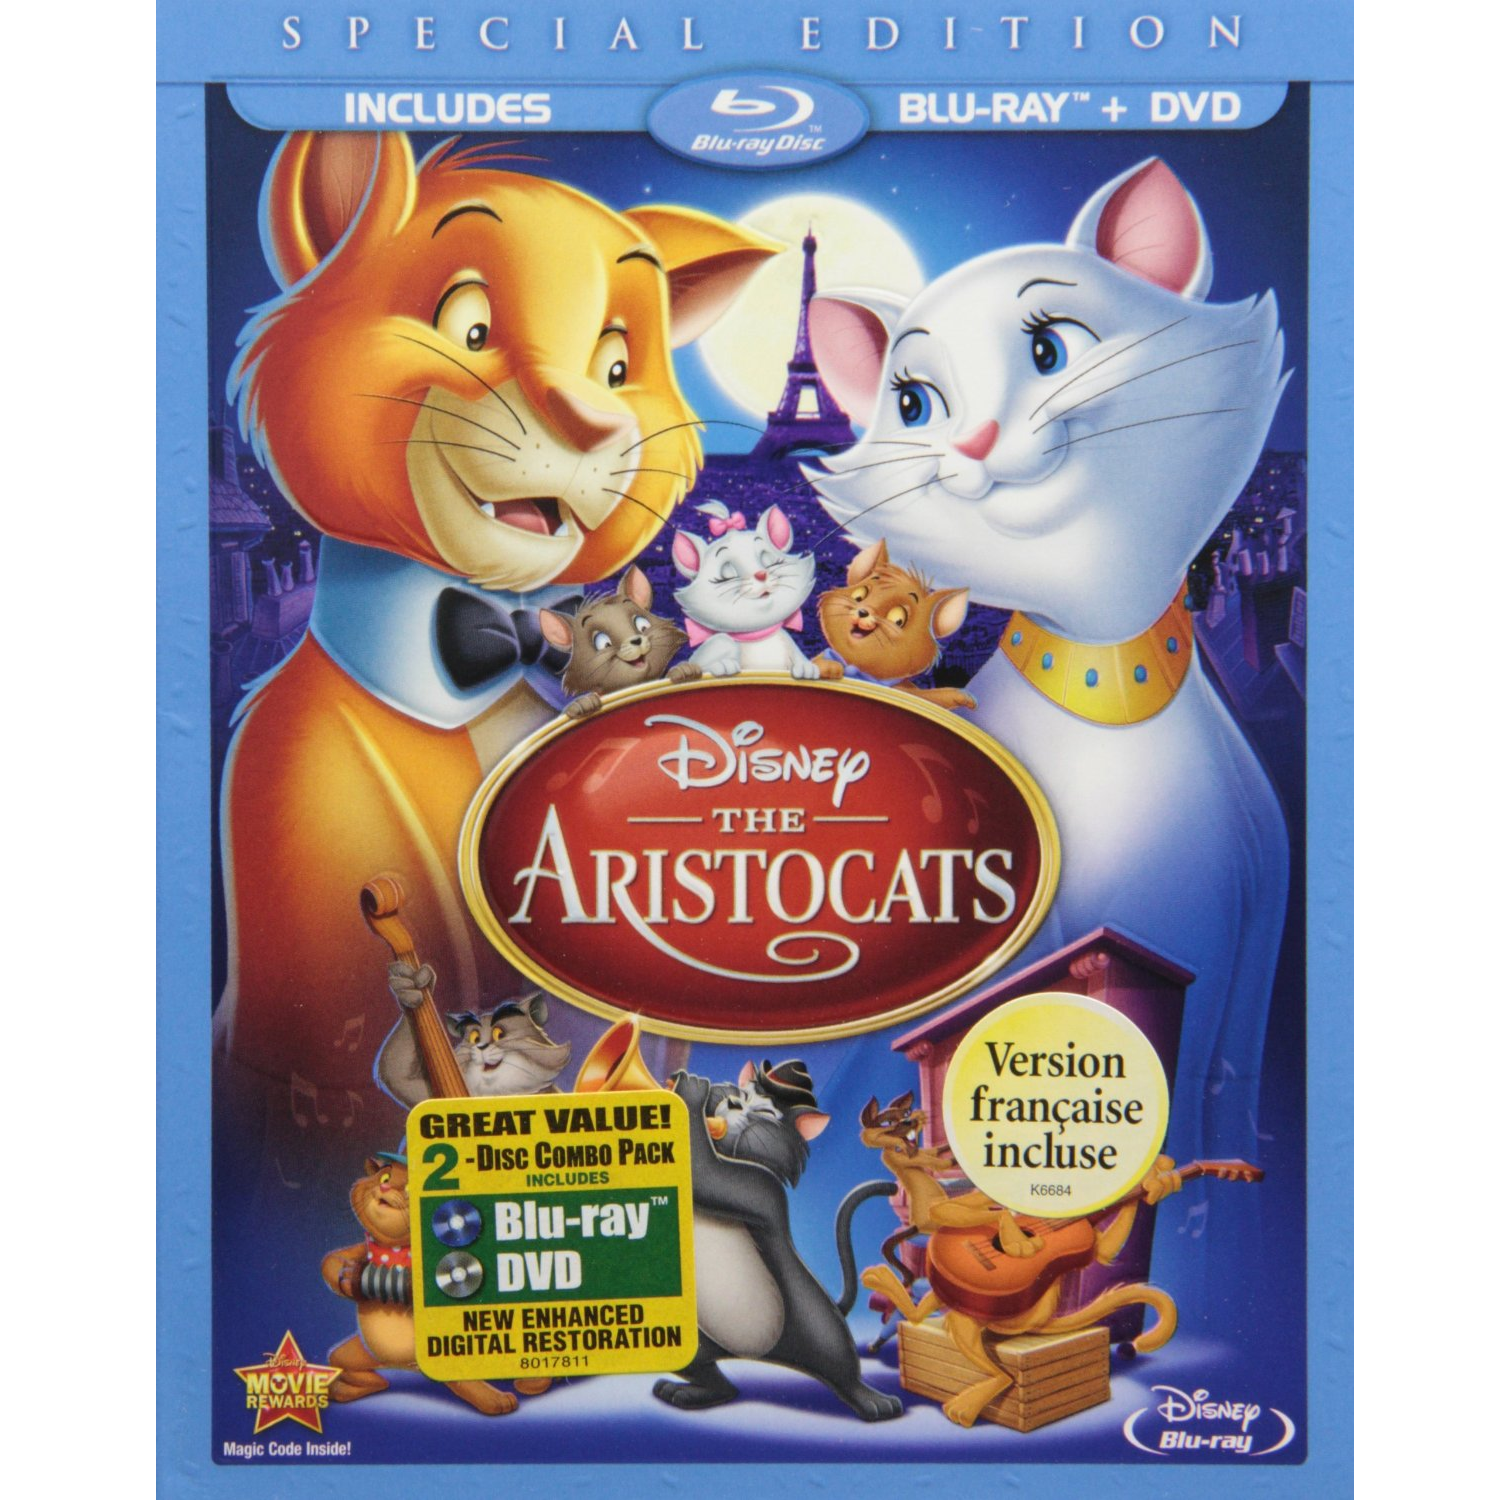 The Aristocats (Blu-ray/DVD) Special Edition Only $9.99 on Amazon!